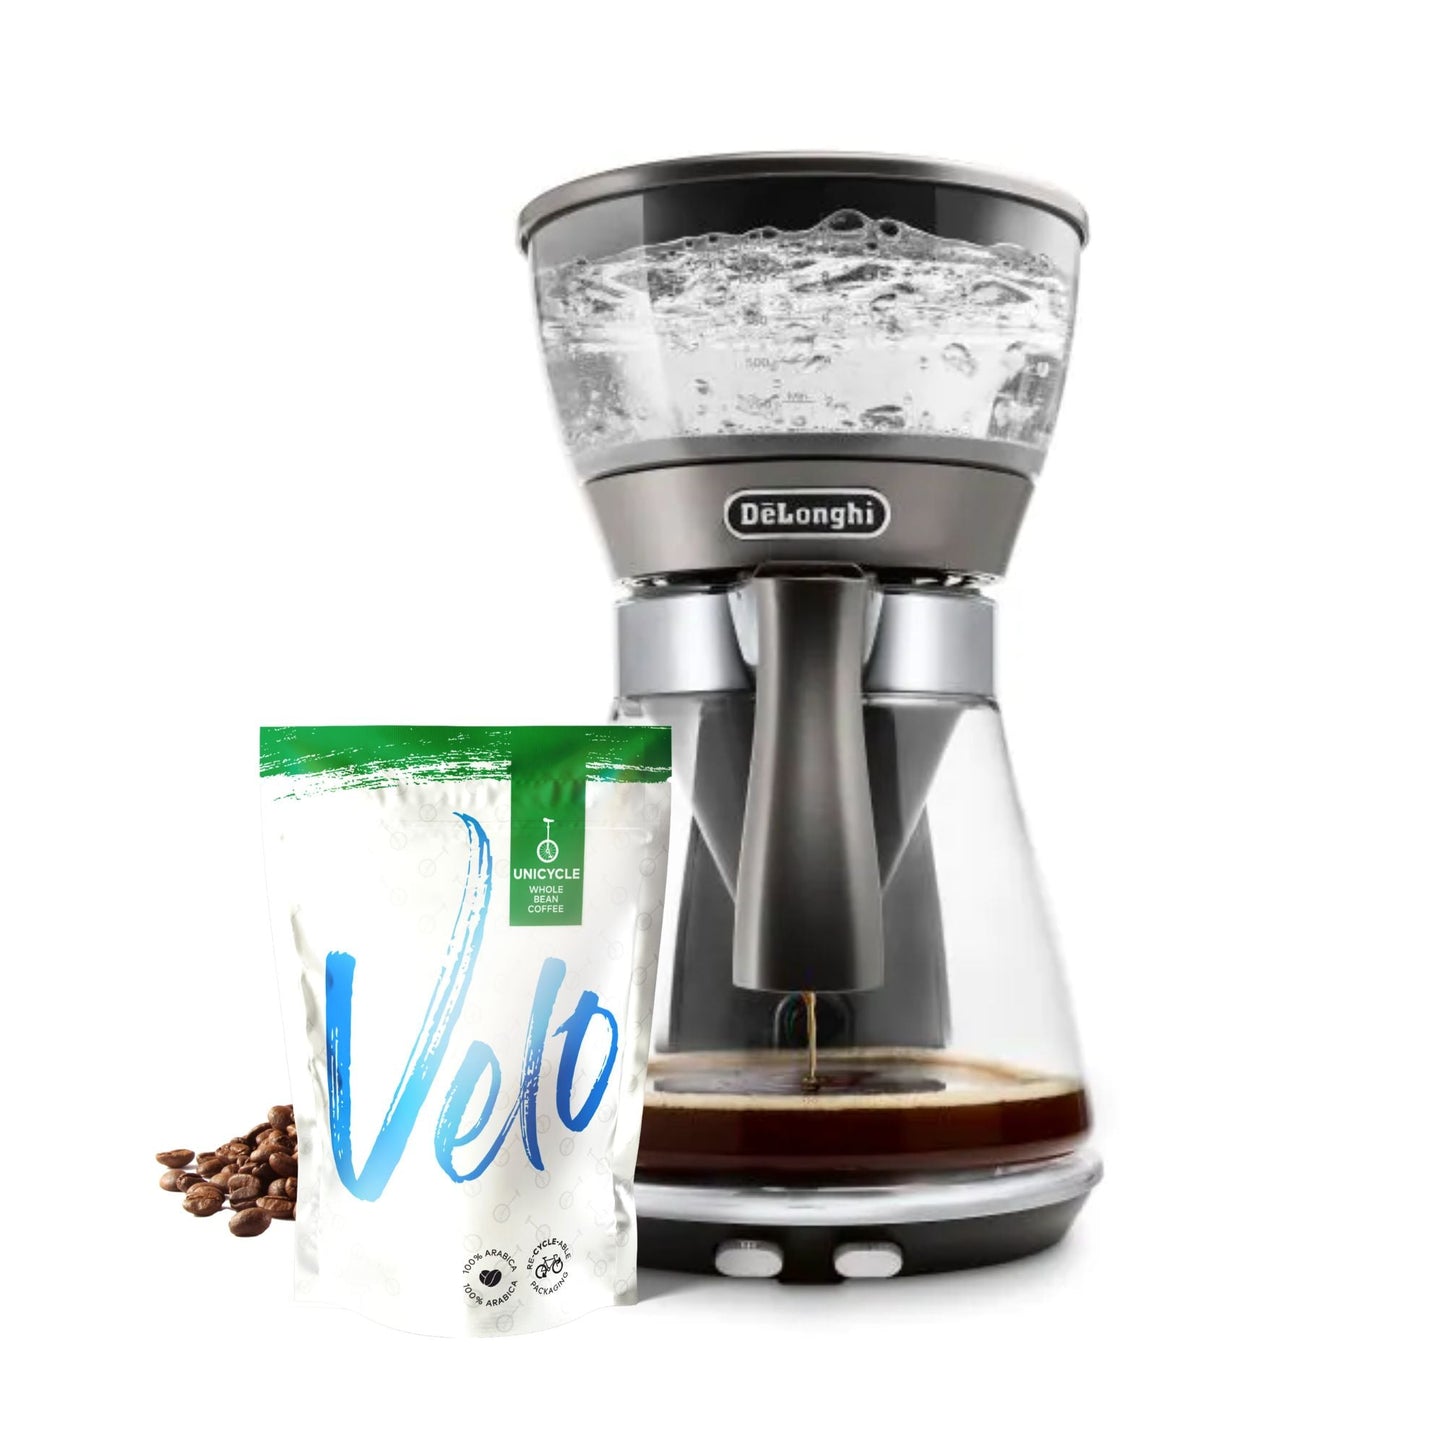 De'Longhi Clessidra - Pour Over Coffee Maker/Filter Drip Coffee Machine - ICM17210 - Velo Coffee Roasters